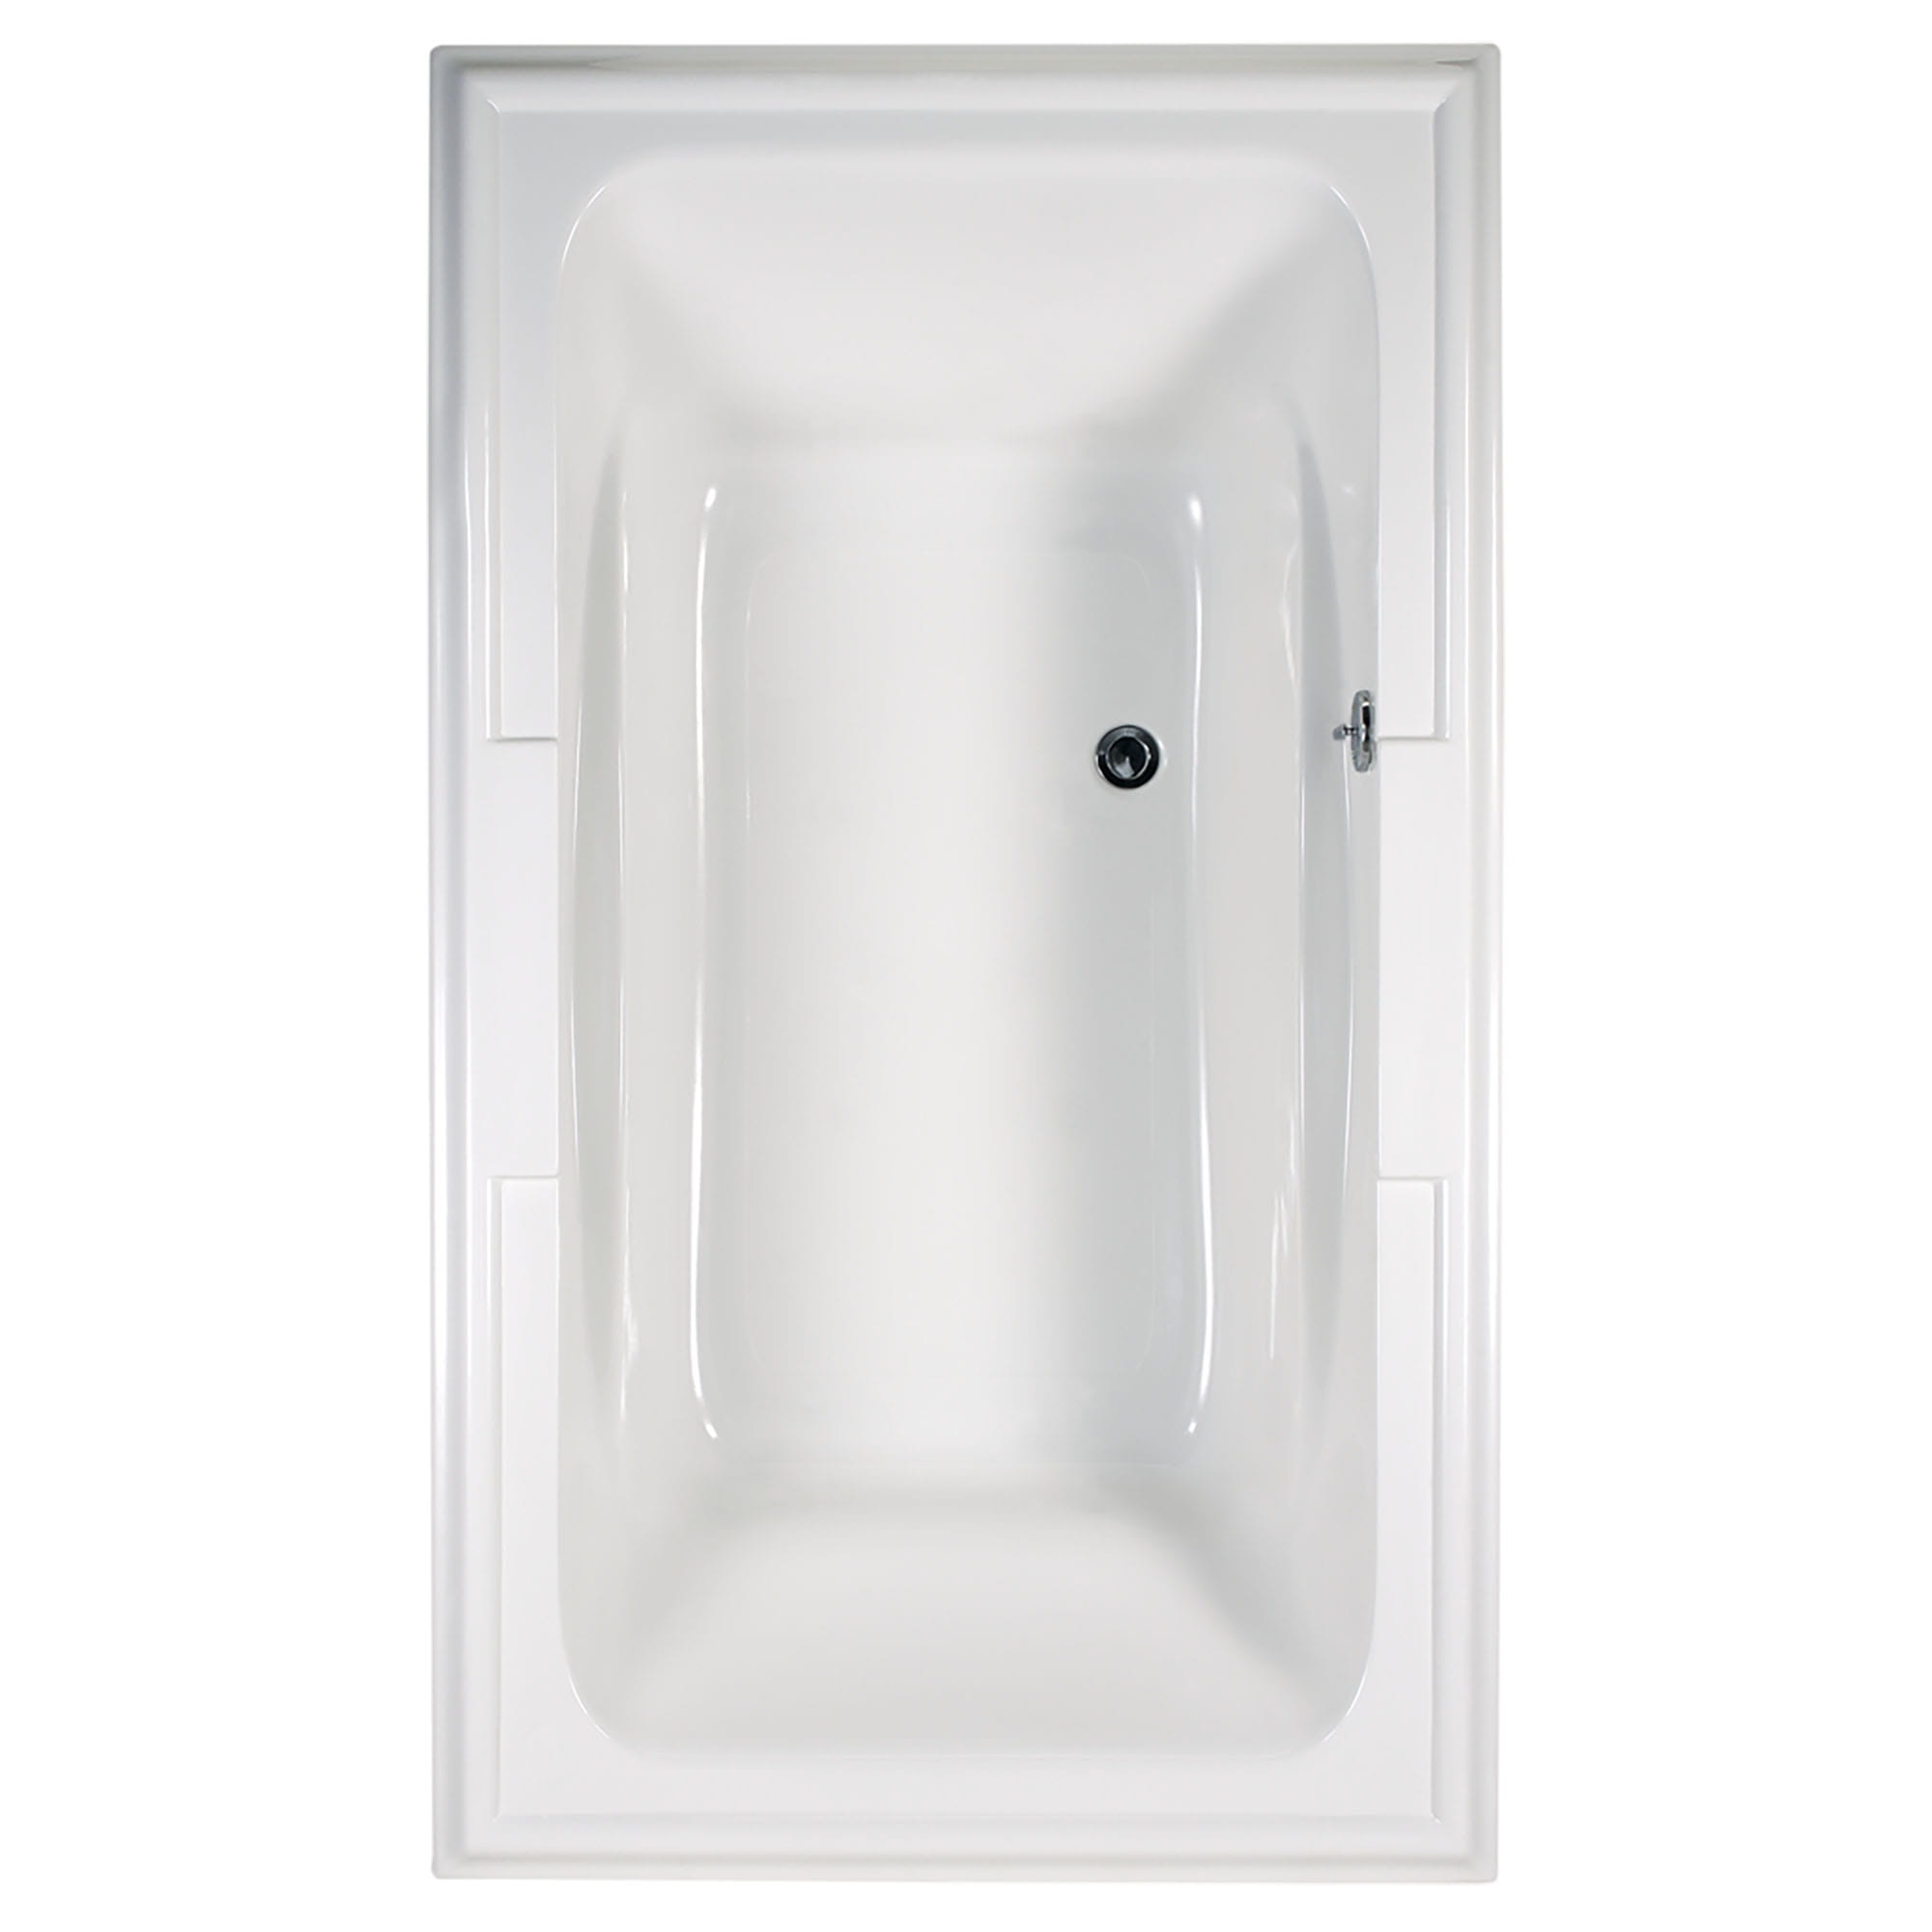 Town Square 72 x 42 Inch Drop In Bathtub With EcoSilent EverClean Hydromassage System WHITE